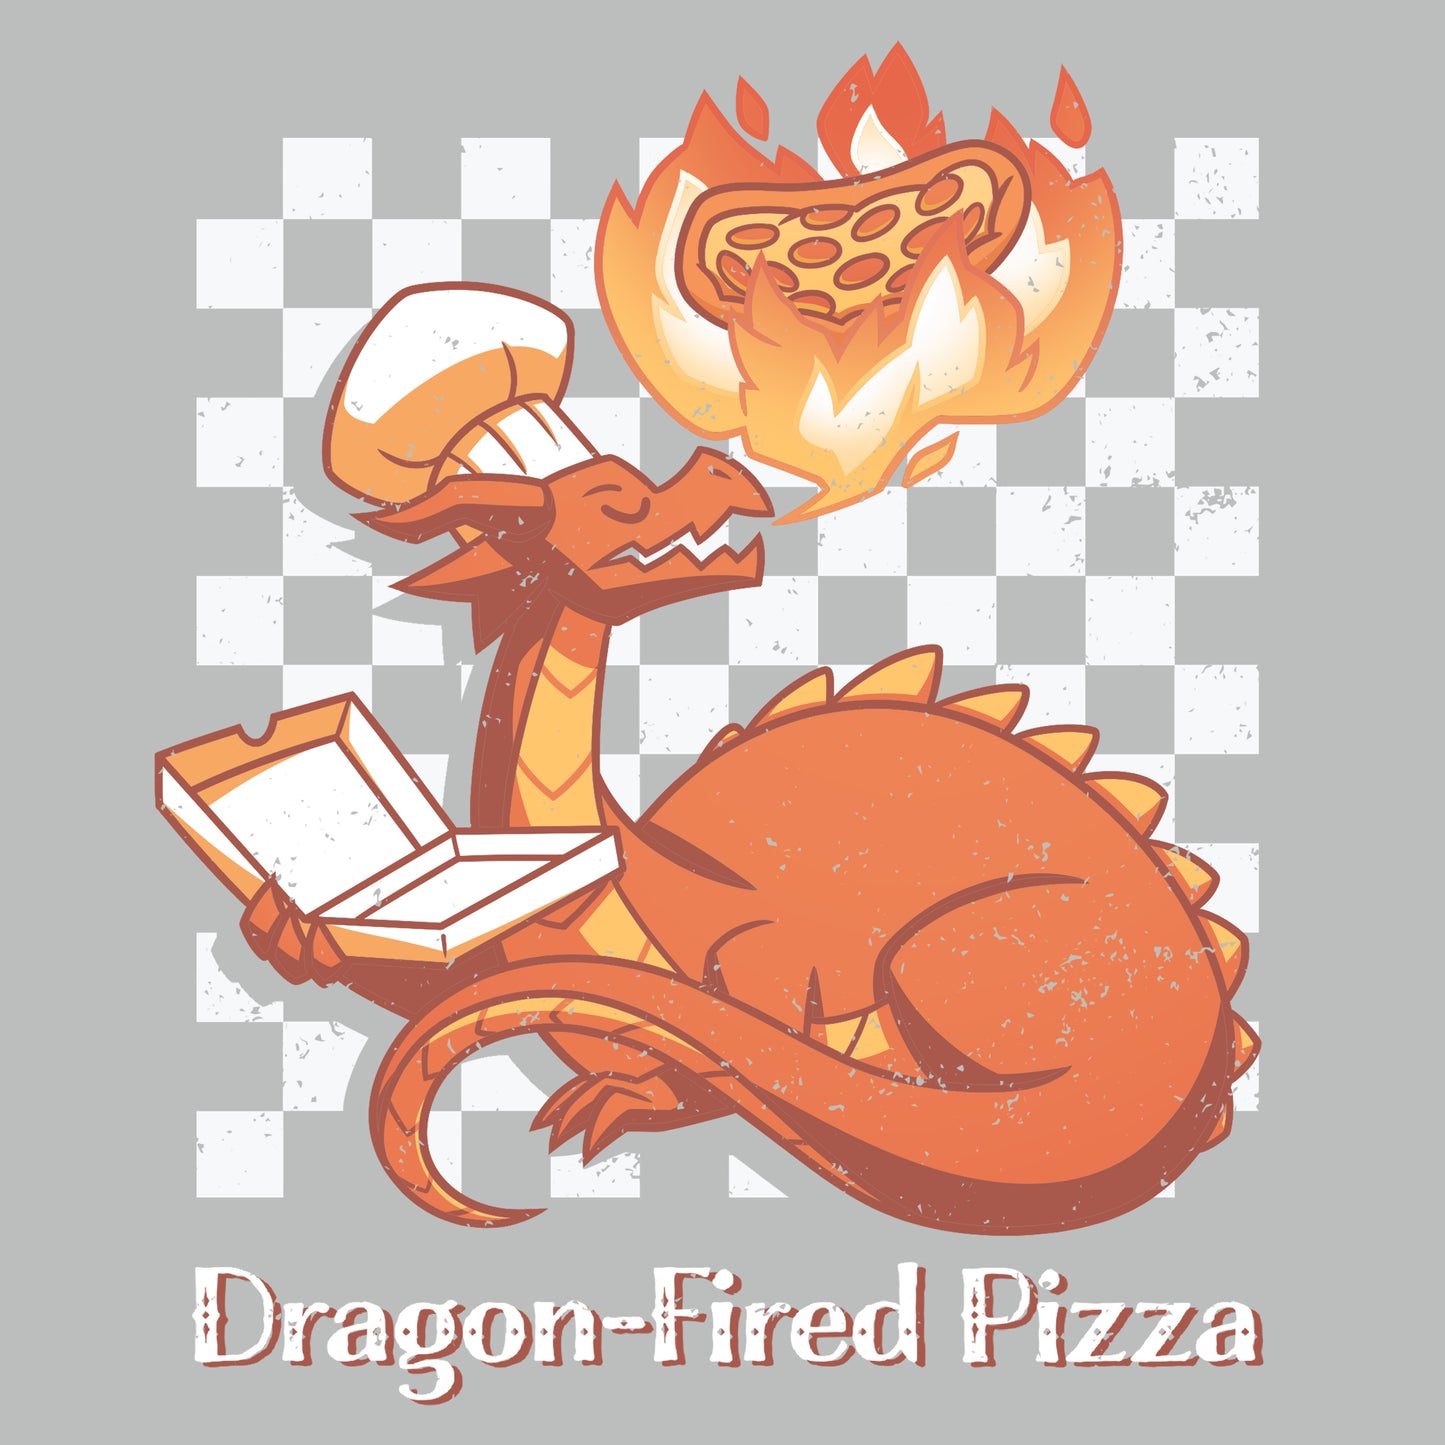 Premium Cotton T-shirt - Illustration of a dragon wearing a chef's hat, breathing extra hot fire onto a pizza while holding an open pizza box. Text at the bottom reads "Dragon-Fired Pizza," printed on super soft ringspun cotton by monsterdigital.